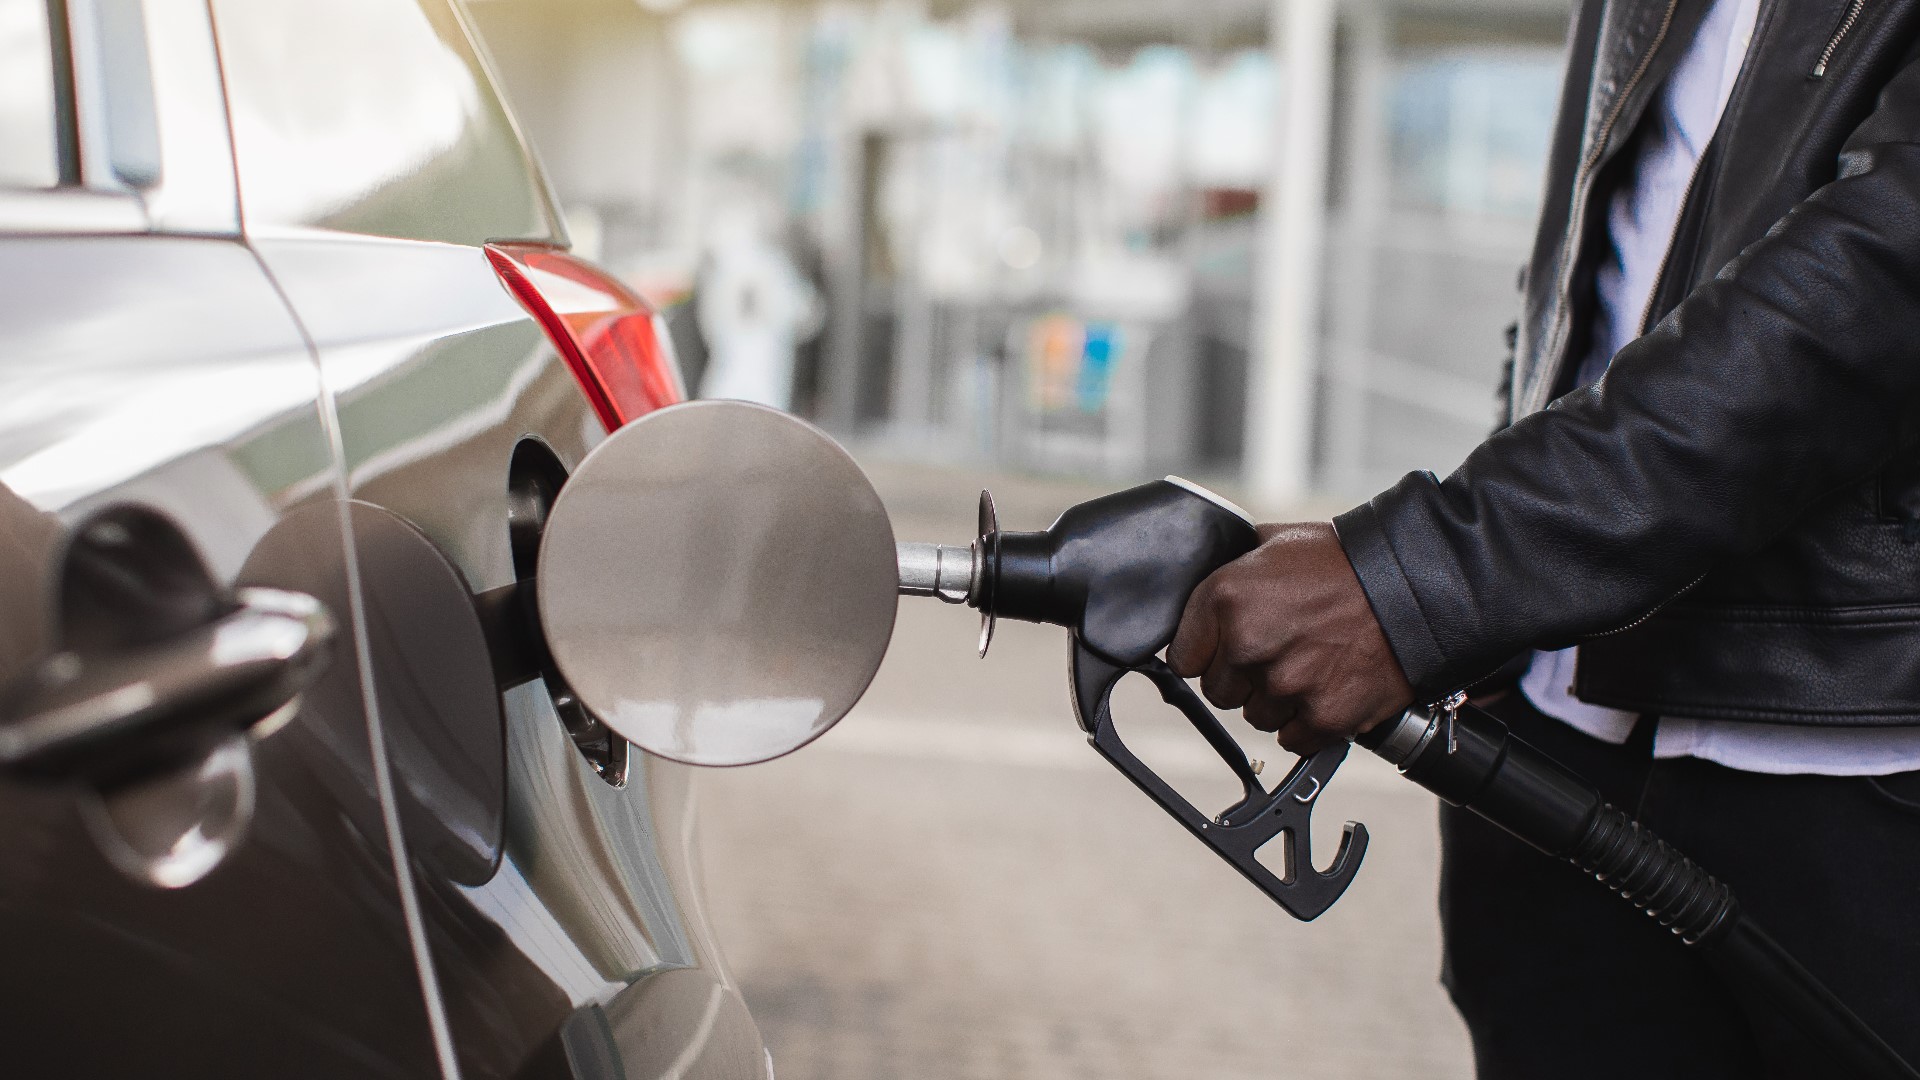 The bill gives gas station owners the choice to offer self-service. Gas stations are required to have an equal amount of self-service and full-service pumps.